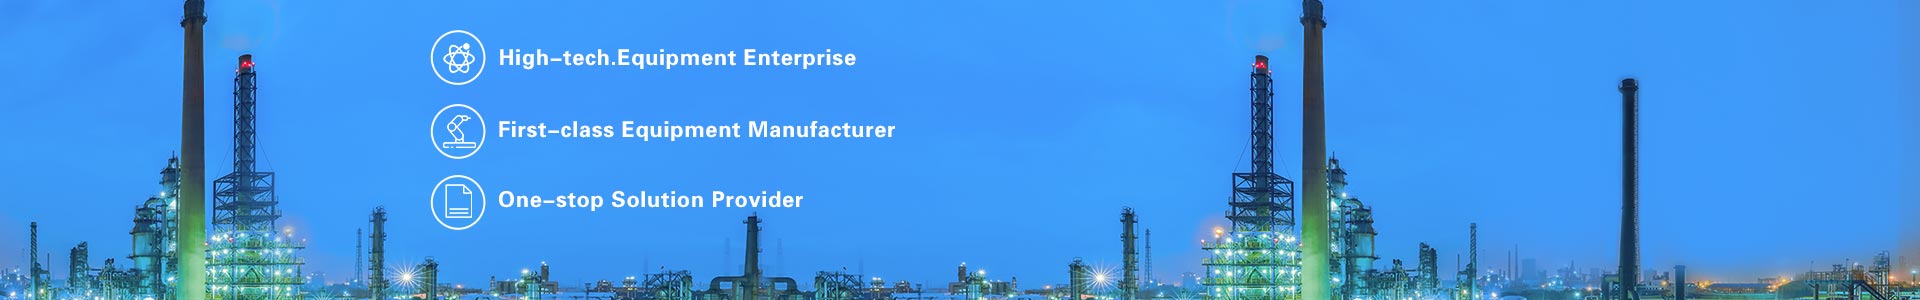 Craun technical equipment Co., Ltd. is a manufacturer specializing in the research and development of solid control equipment, mud treatment equipment and mud water separation system, which is widely used in the fields of oilfield drilling, infrastructure mud treatment, waste treatment and other environmental protection fields